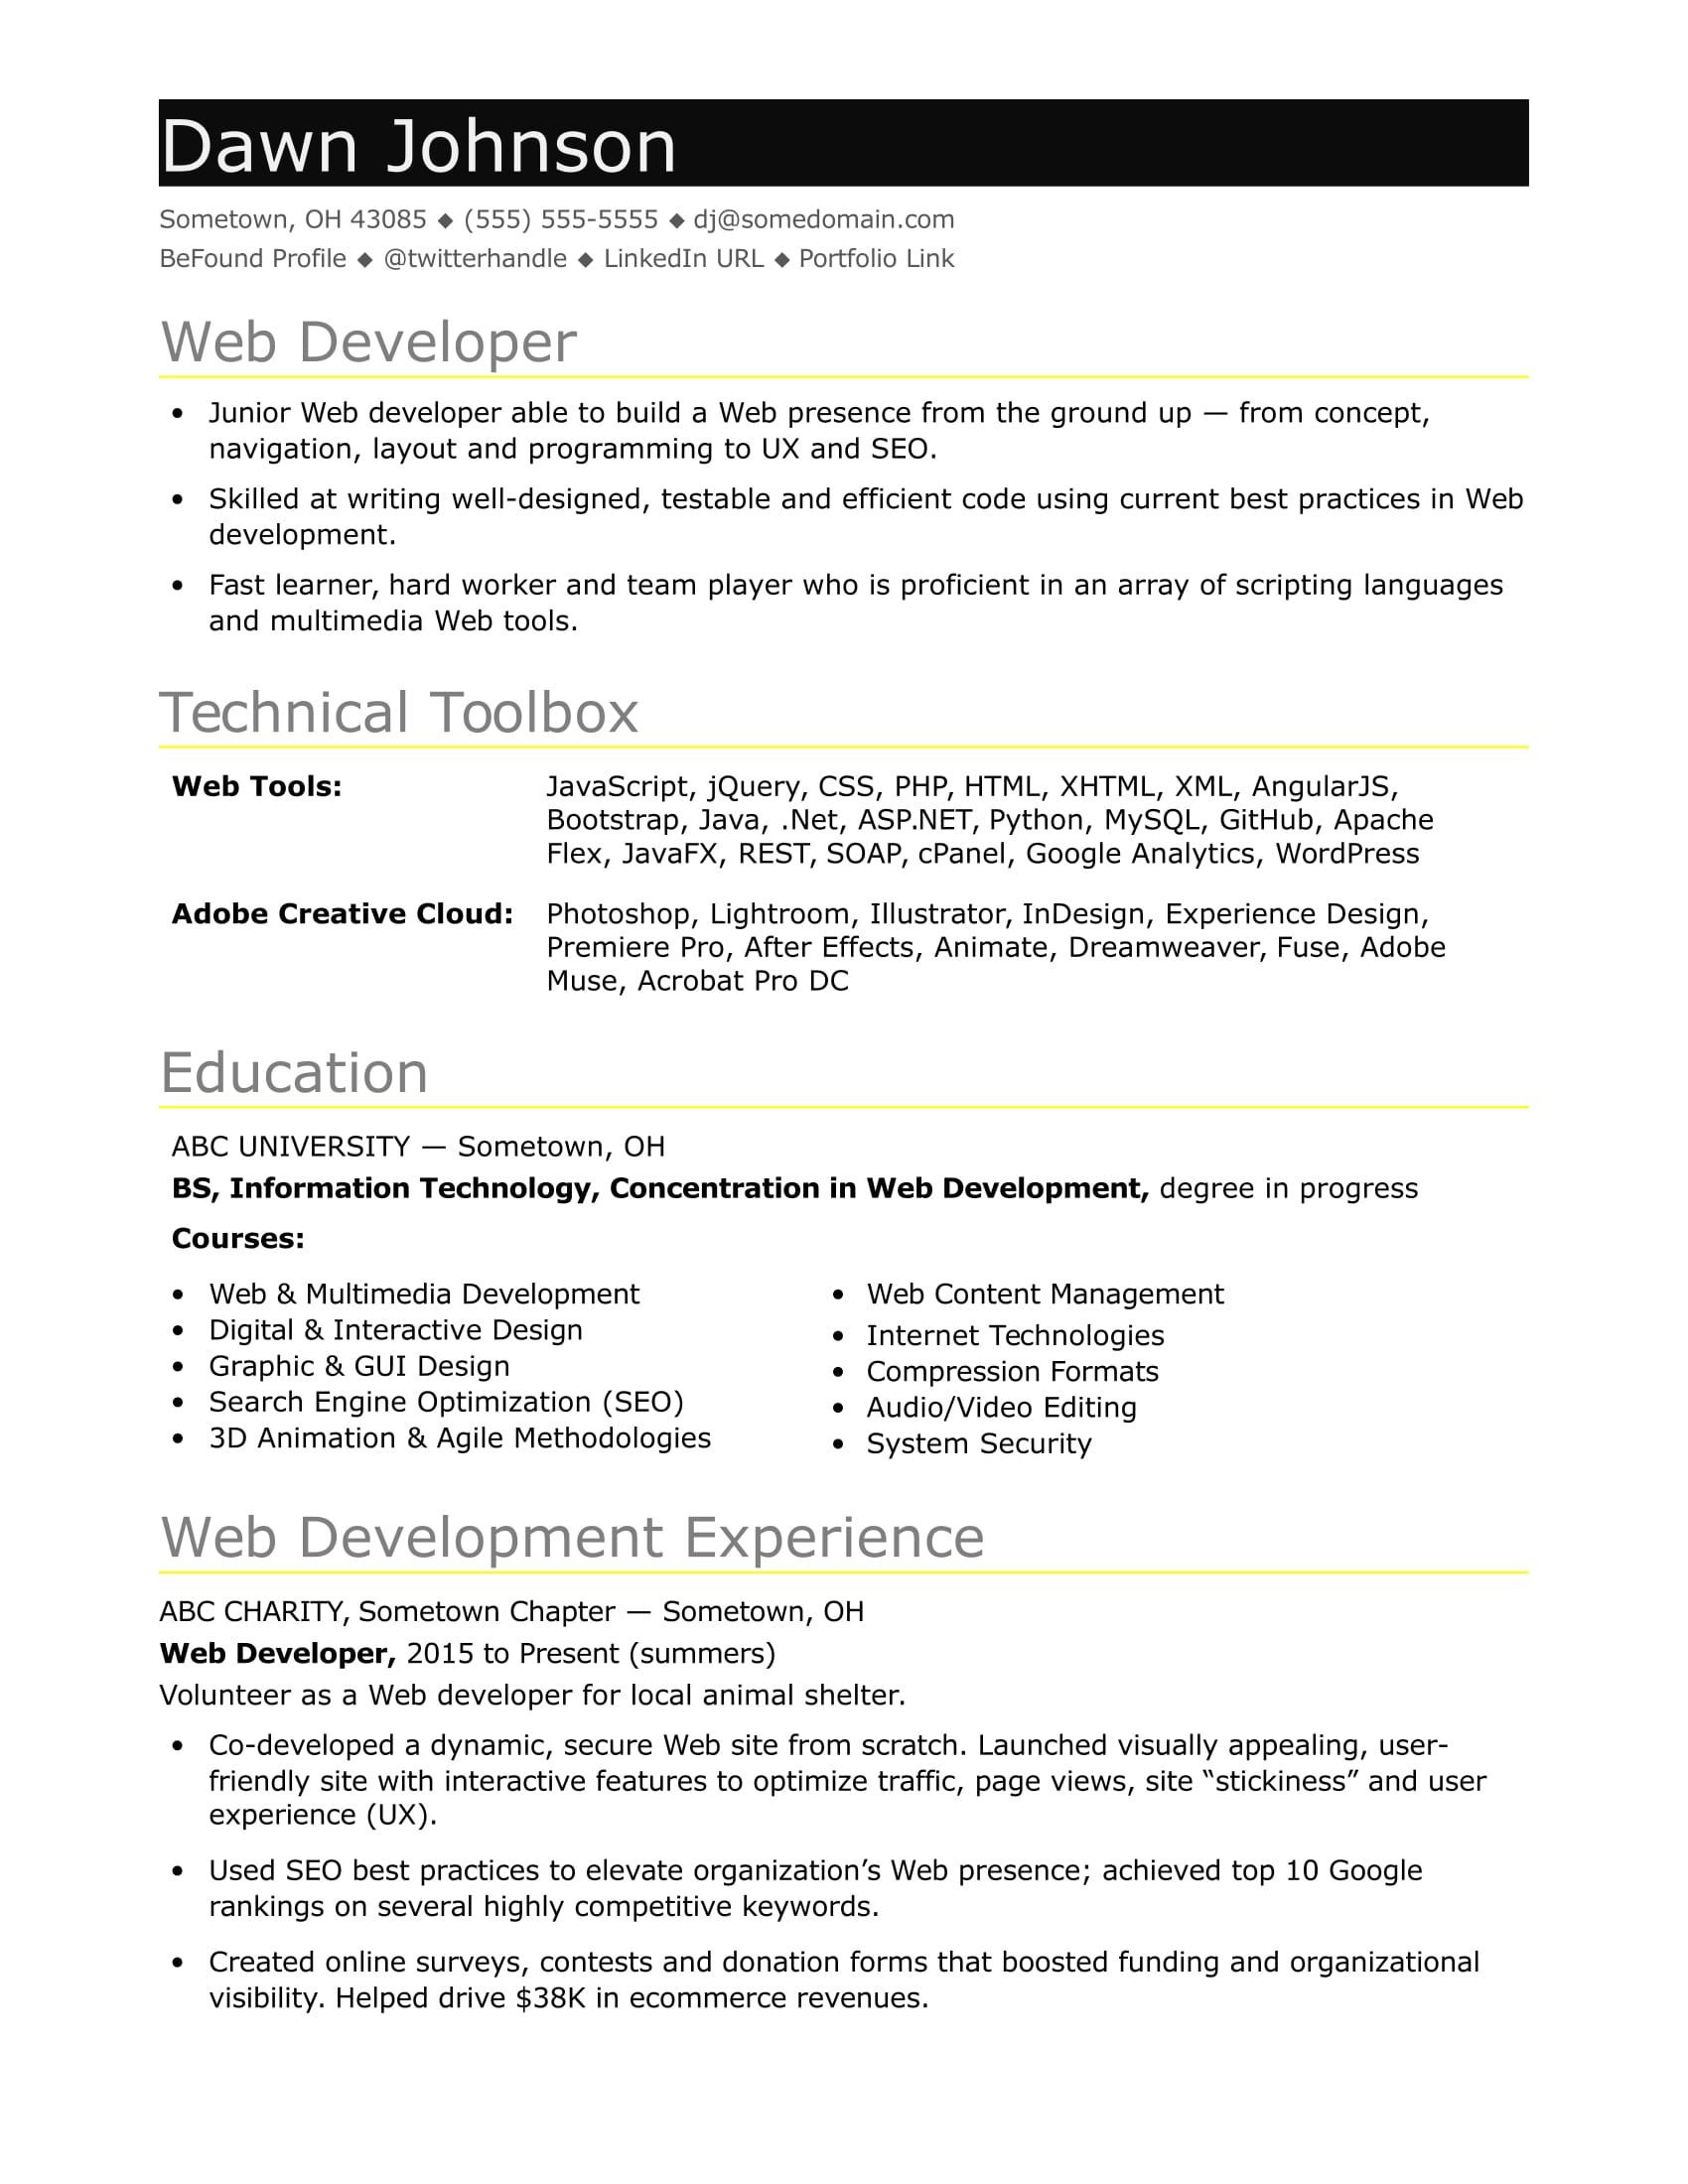 Sample Resume for Entry Level Web Development if Your Web Sites Sizzle but Your Resume Fizzles, Check Out This …